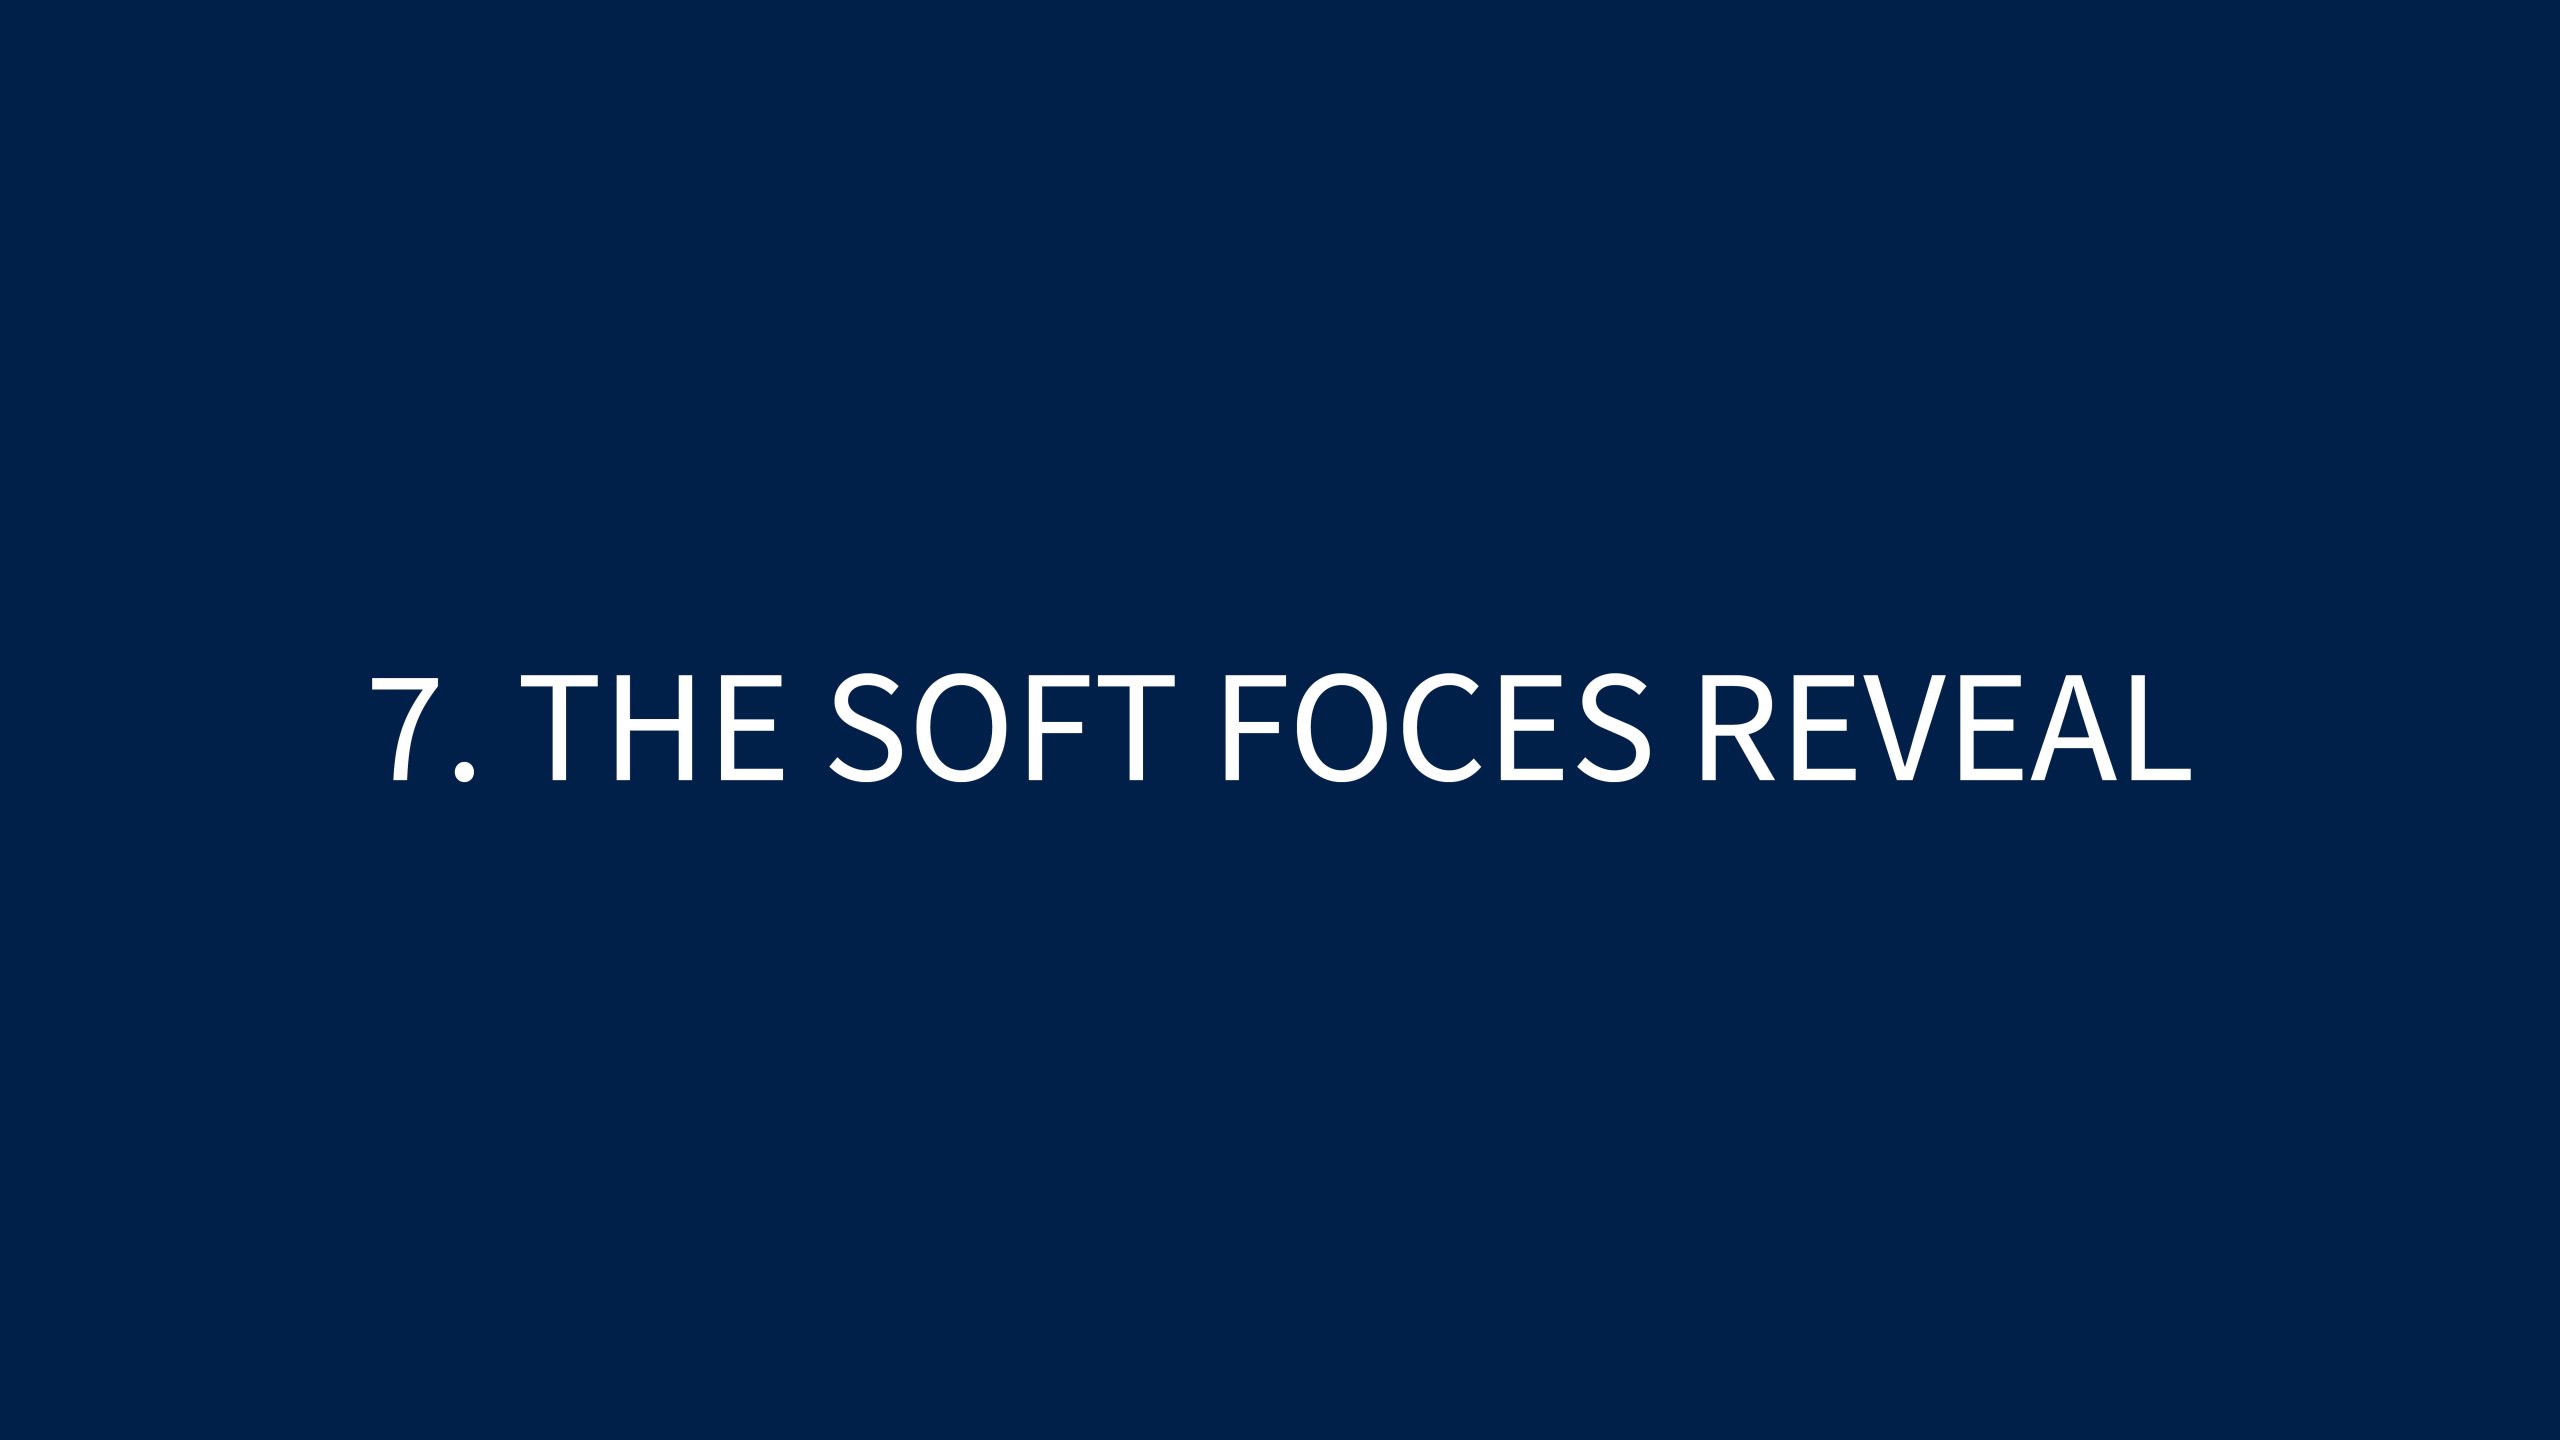 7 THE SOFT FOCES REVEAL